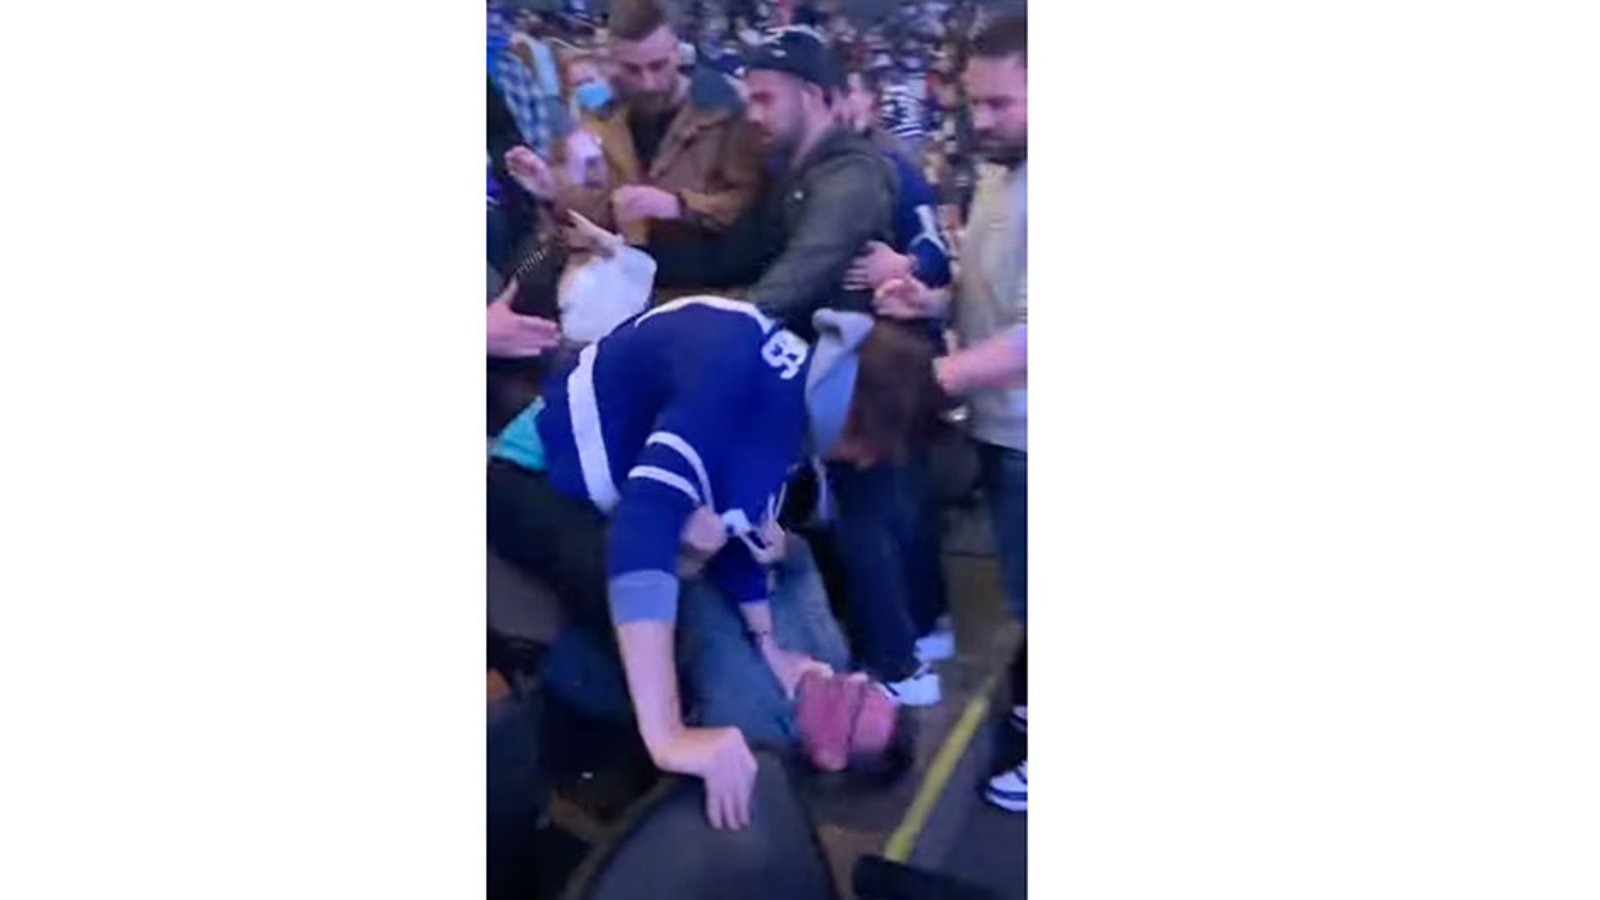 Leafs and Red Wings fans throw down in the stands following last night's game